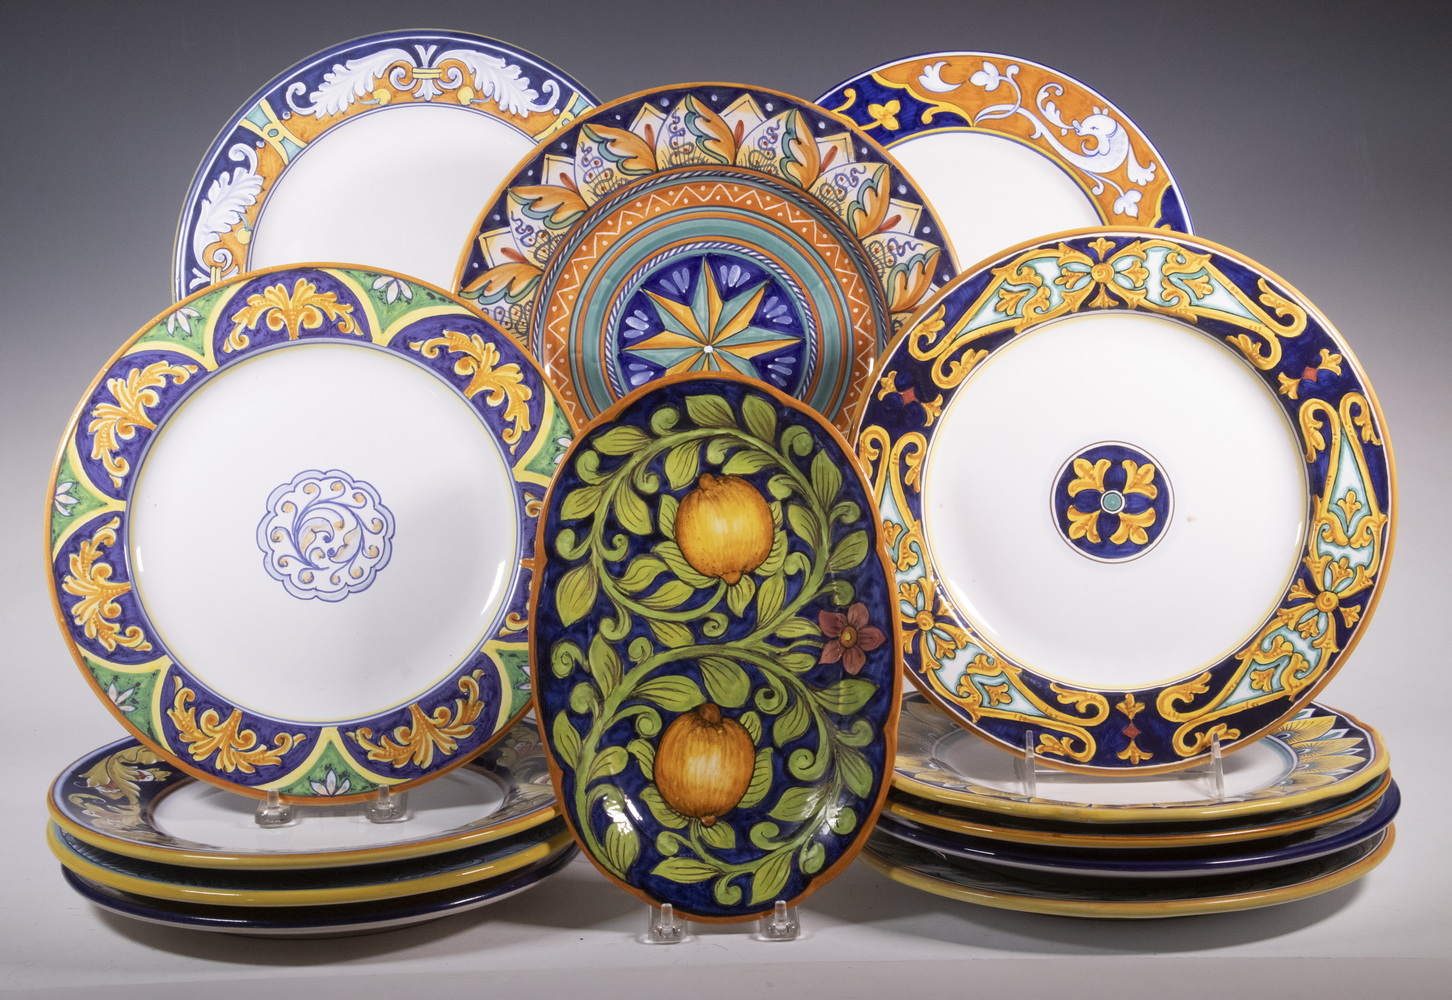 ITALIAN GLAZED POTTERY COLLECTION